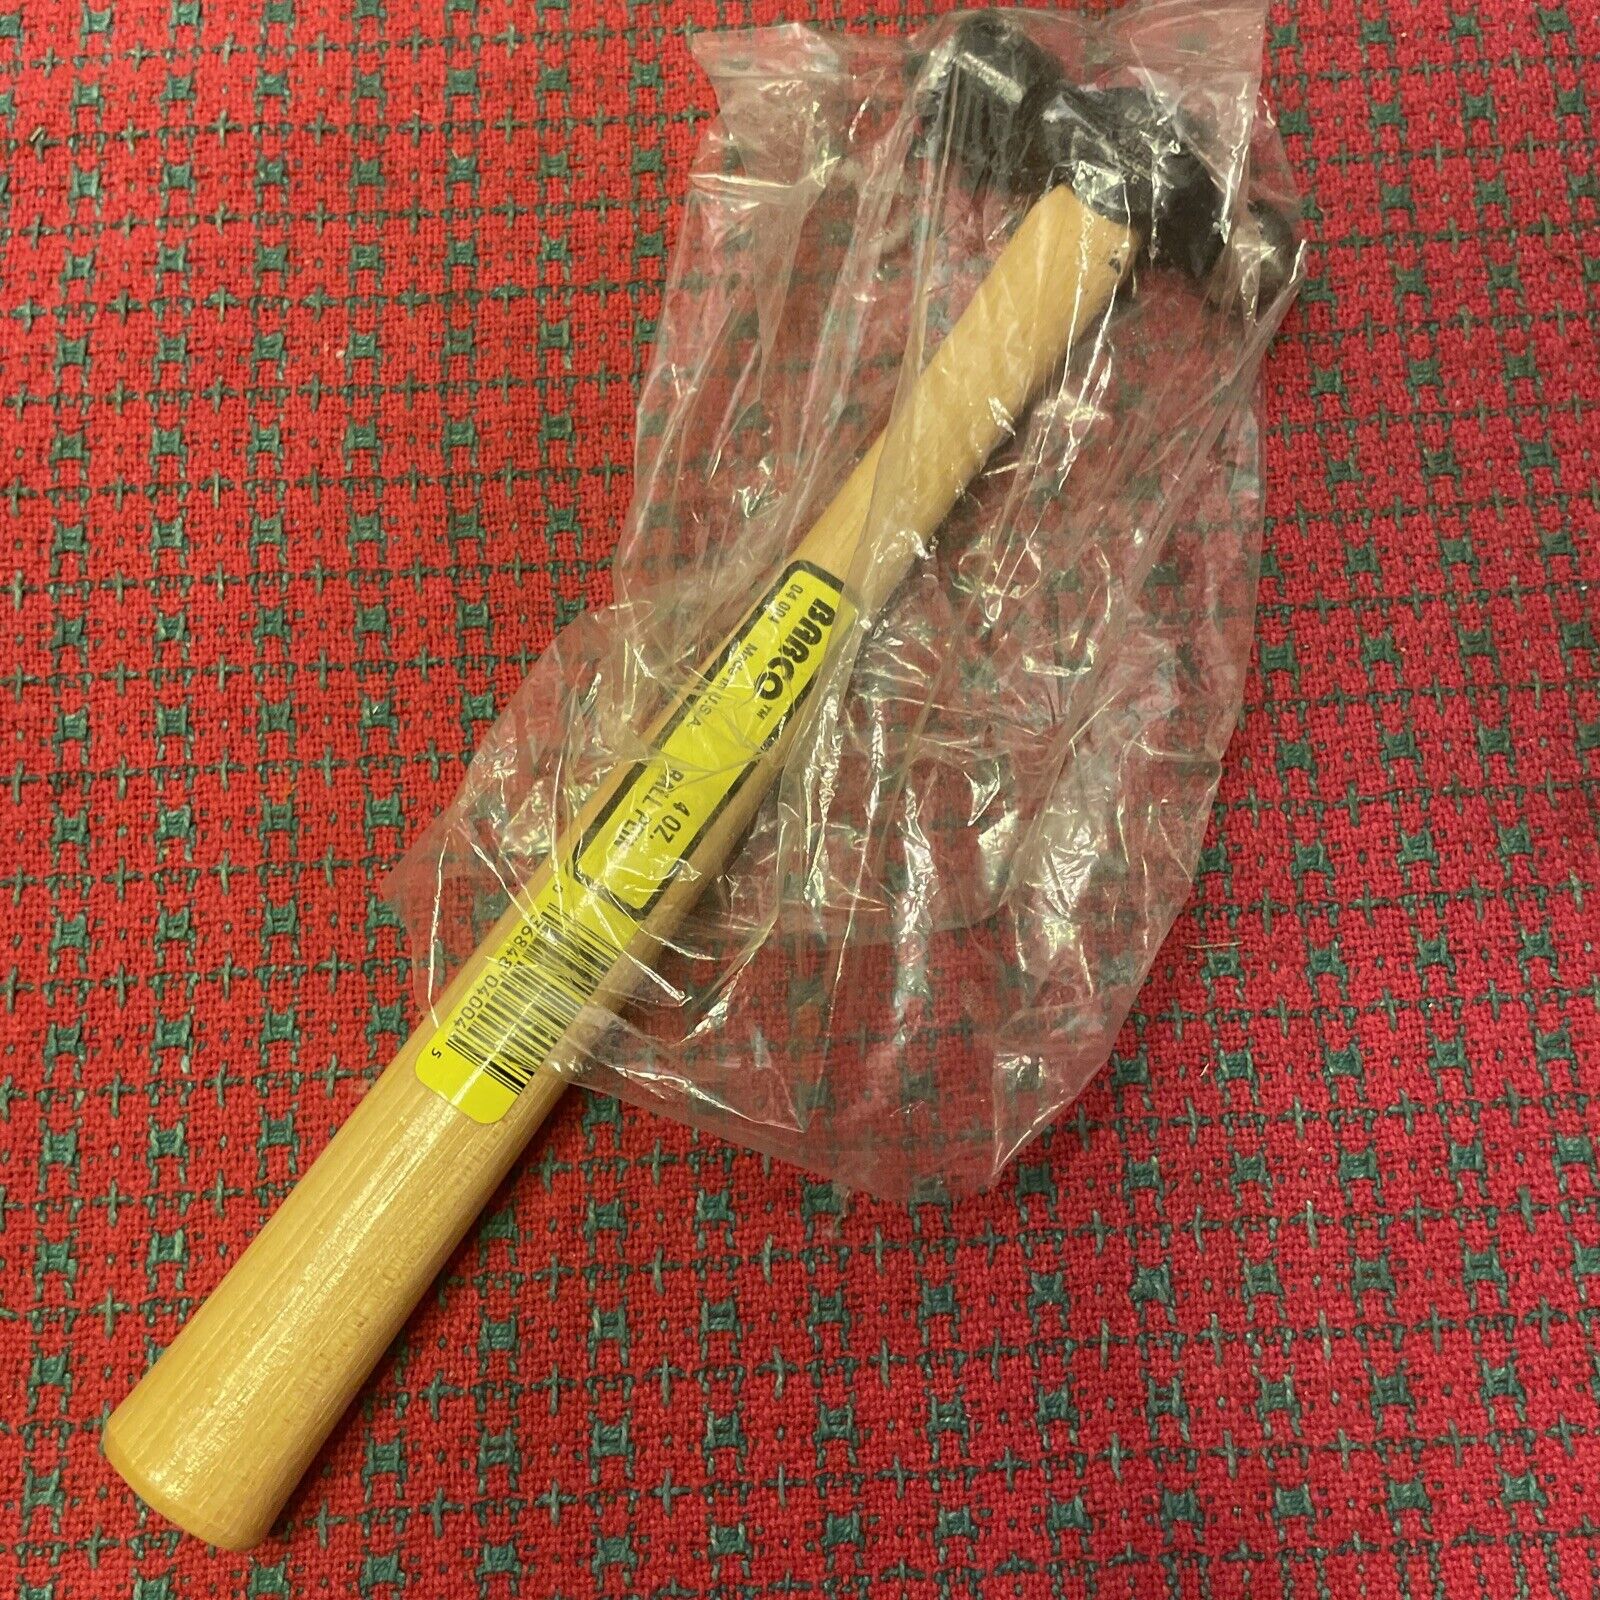 4oz Ball Peen Hammer Hickory Handle Made in the USA 🇺🇸 New NOS